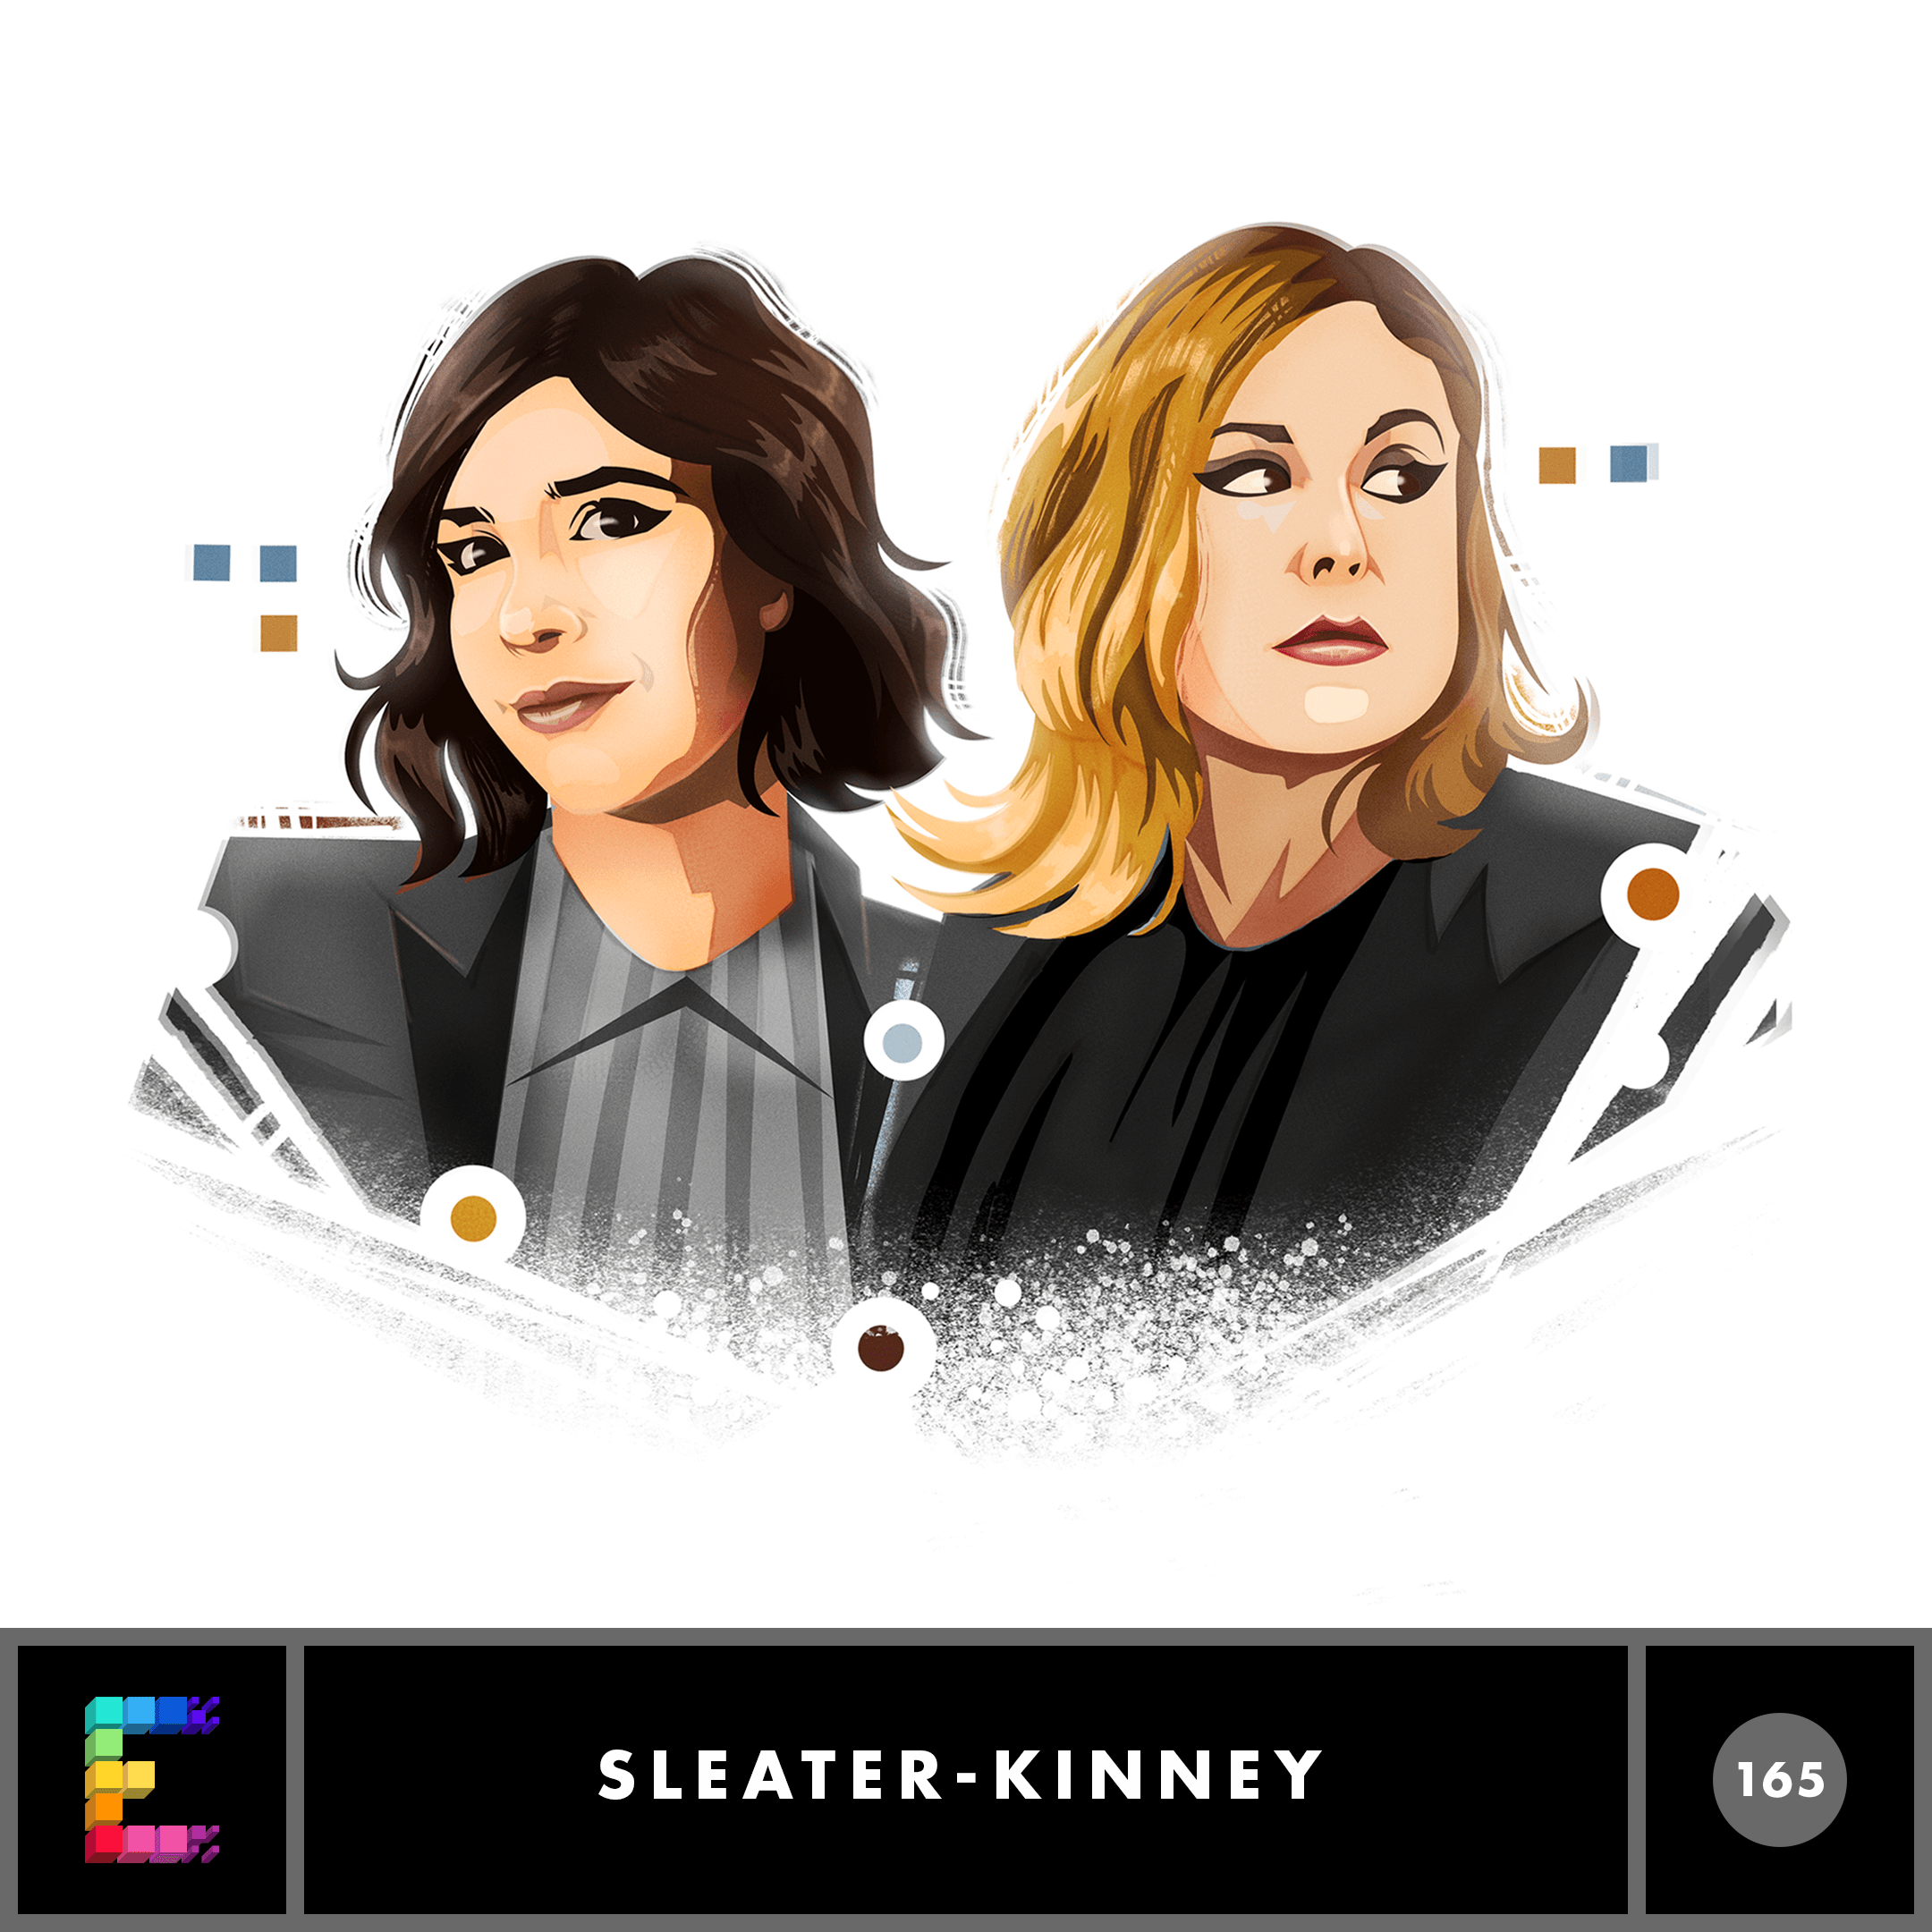 Thumbnail for "Sleater-Kinney - The Future Is Here".